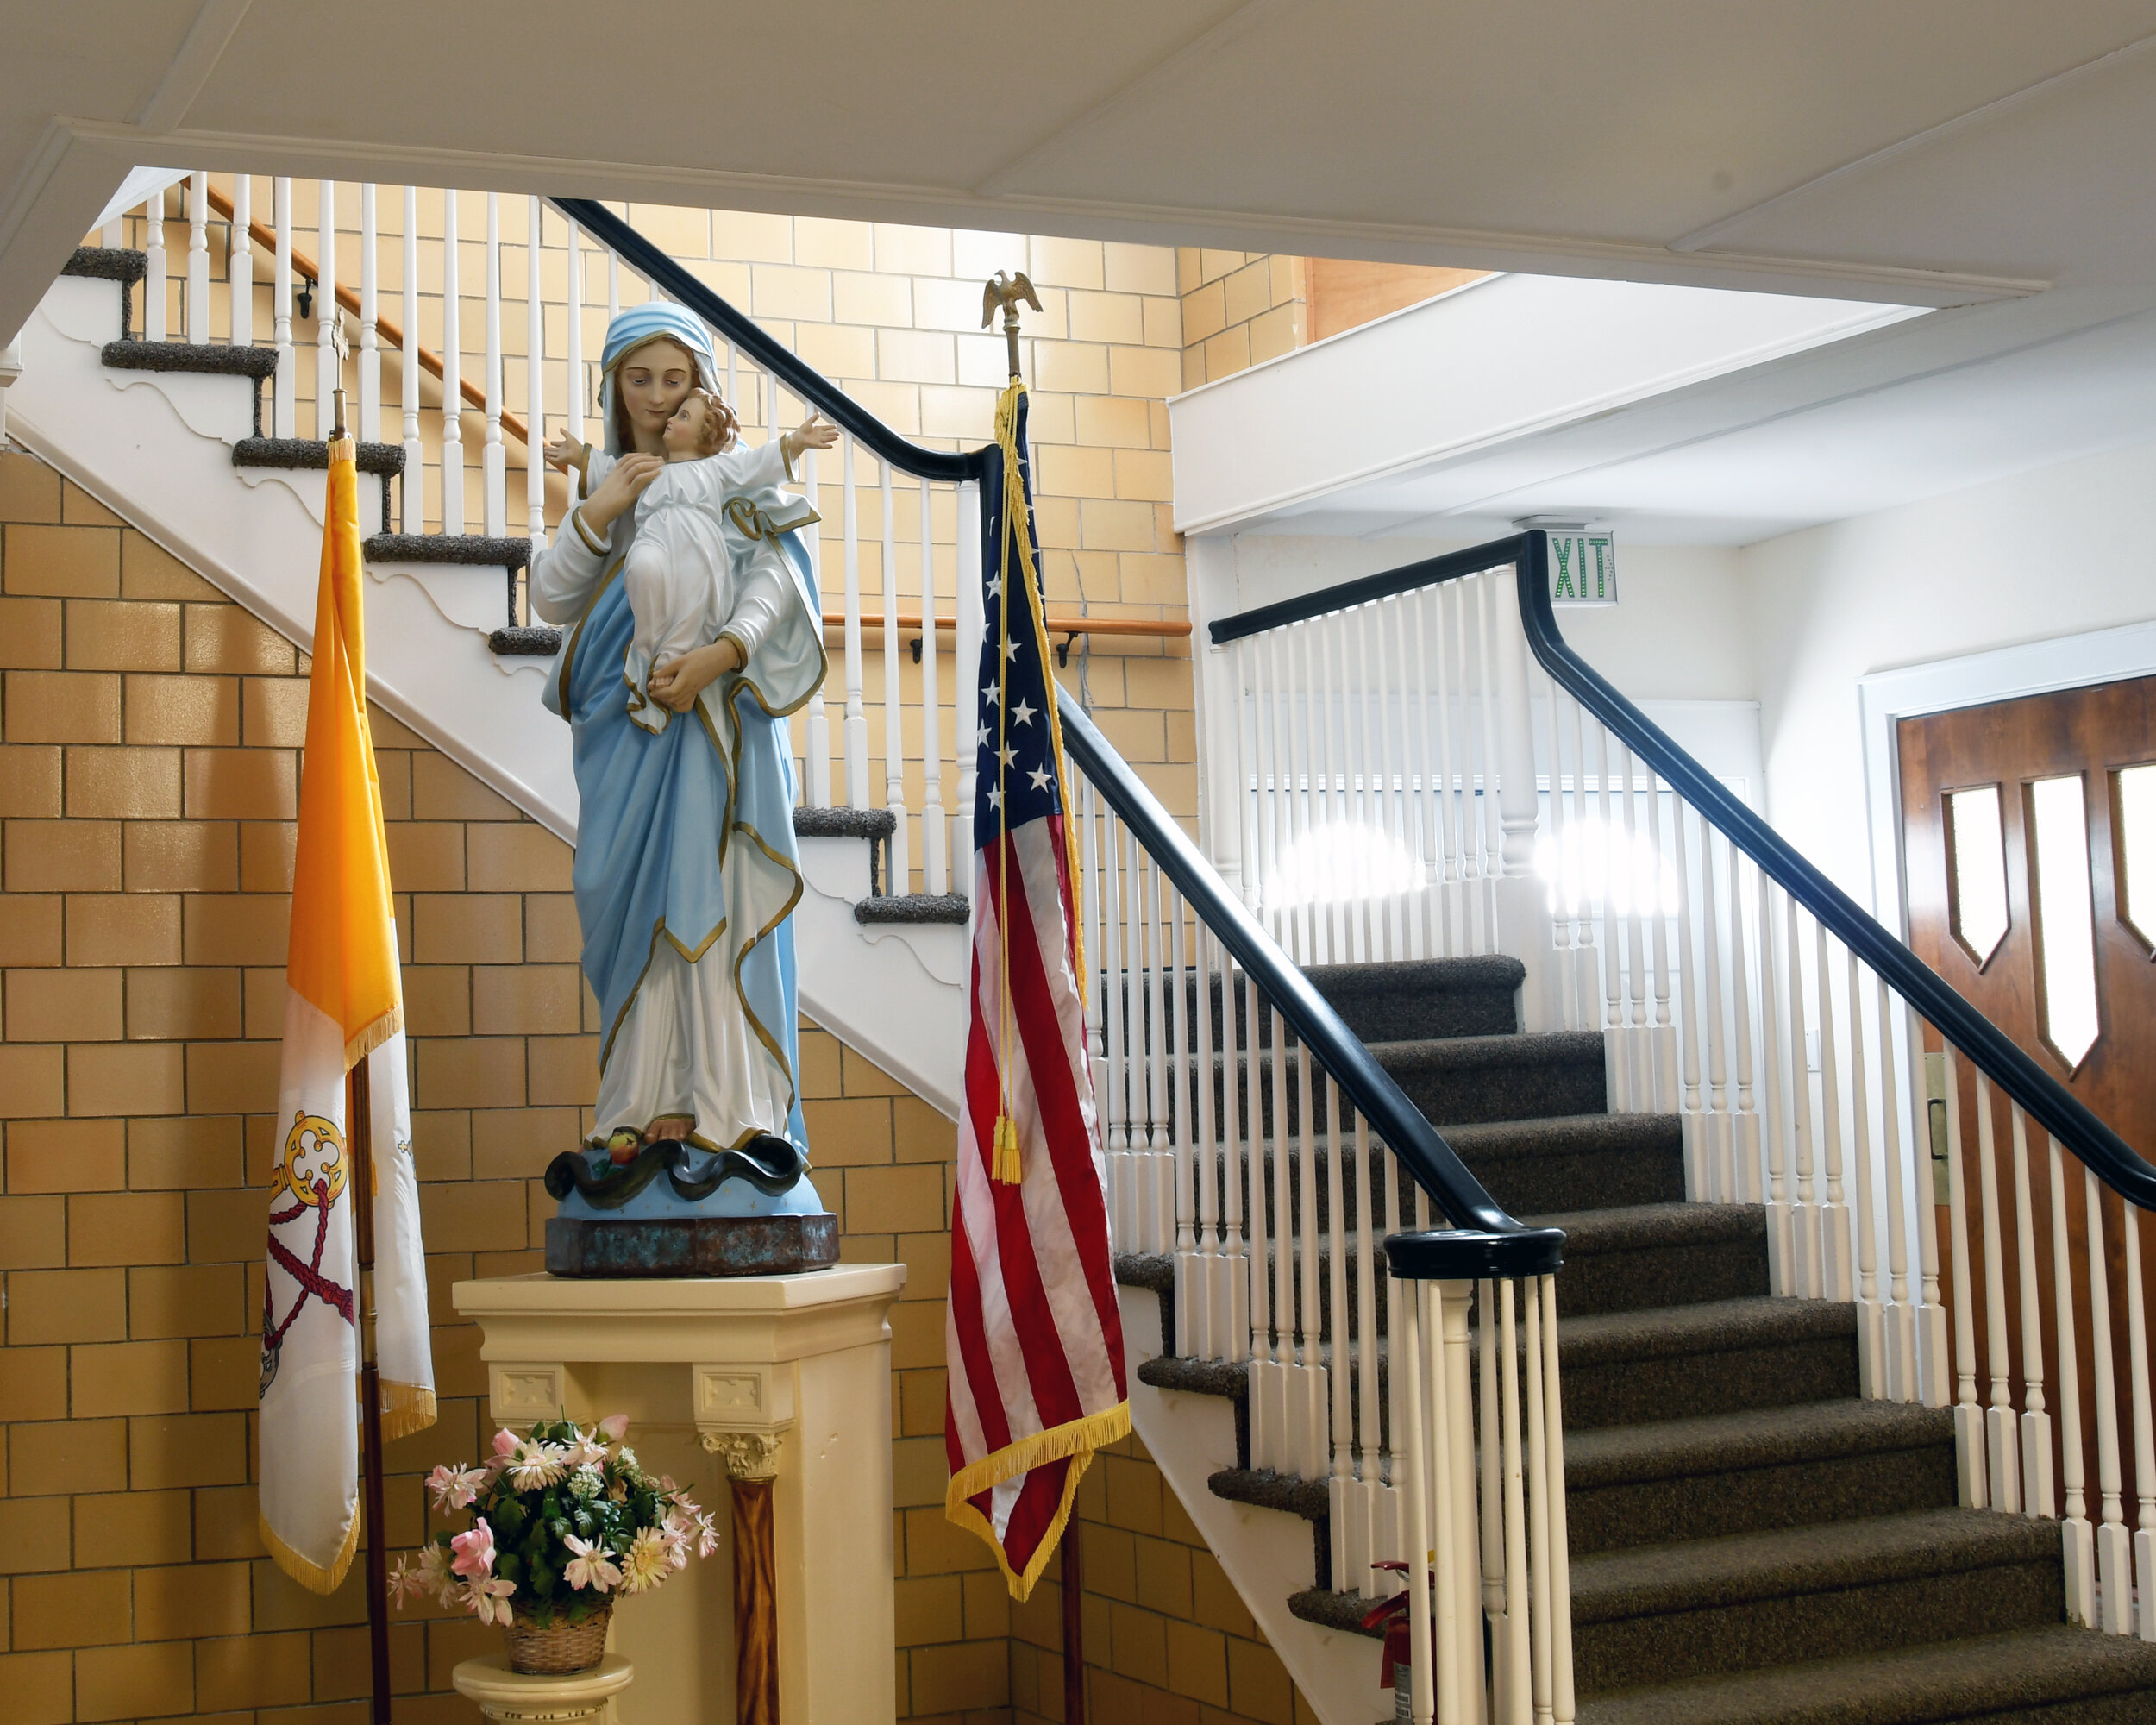 The main staircase inside the entrance to Villa Maria, which now also has an elevator.